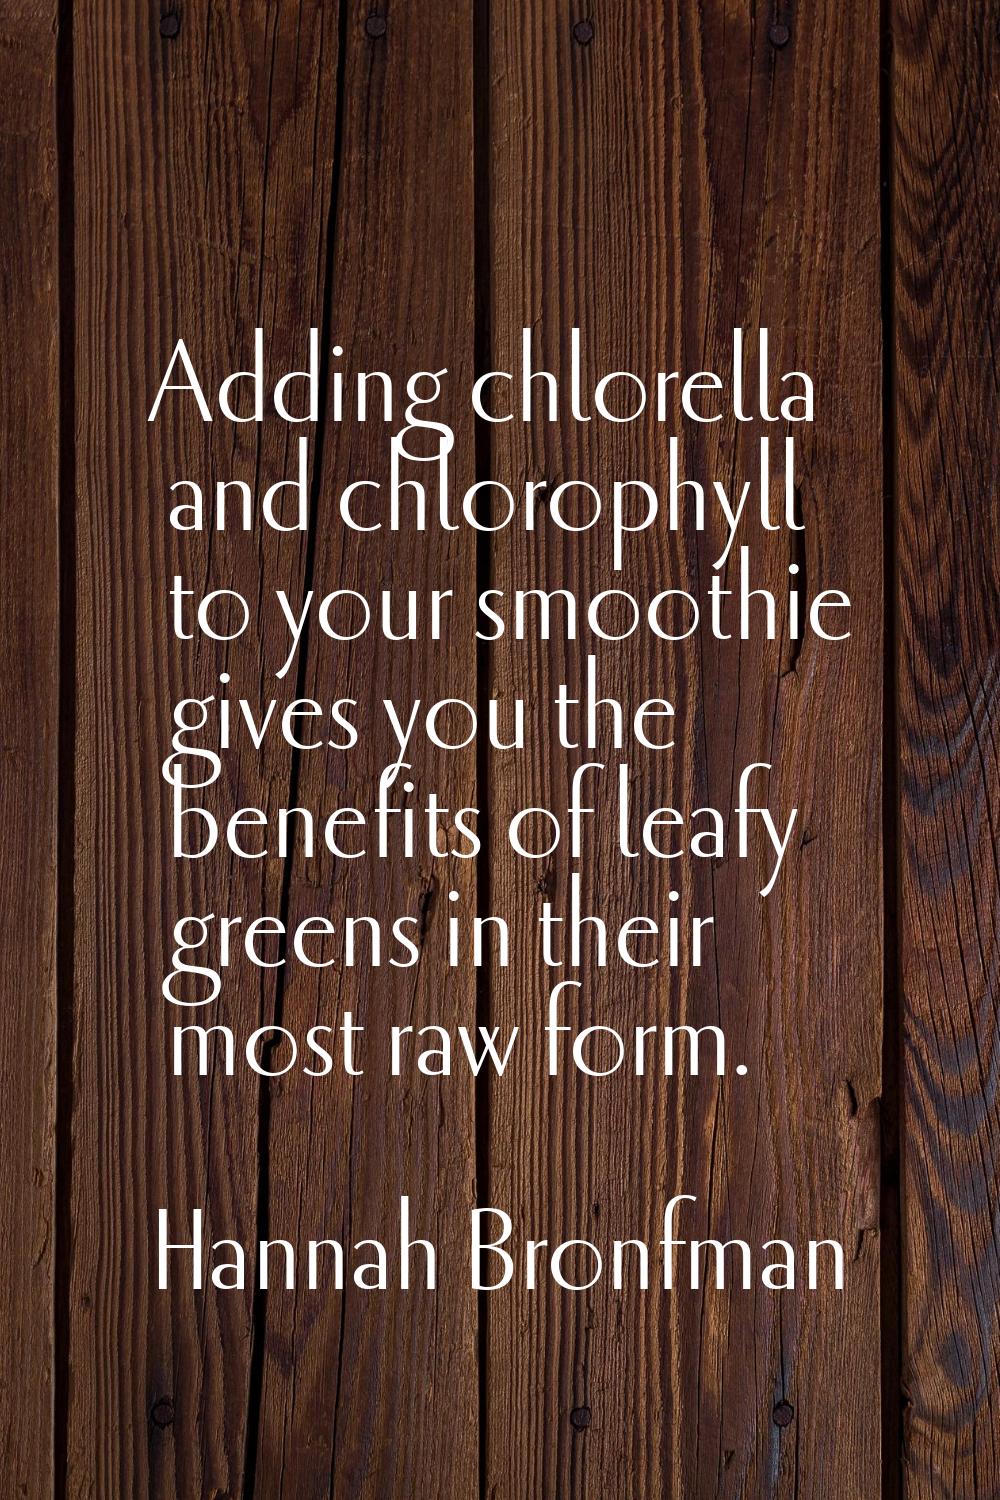 Adding chlorella and chlorophyll to your smoothie gives you the benefits of leafy greens in their m